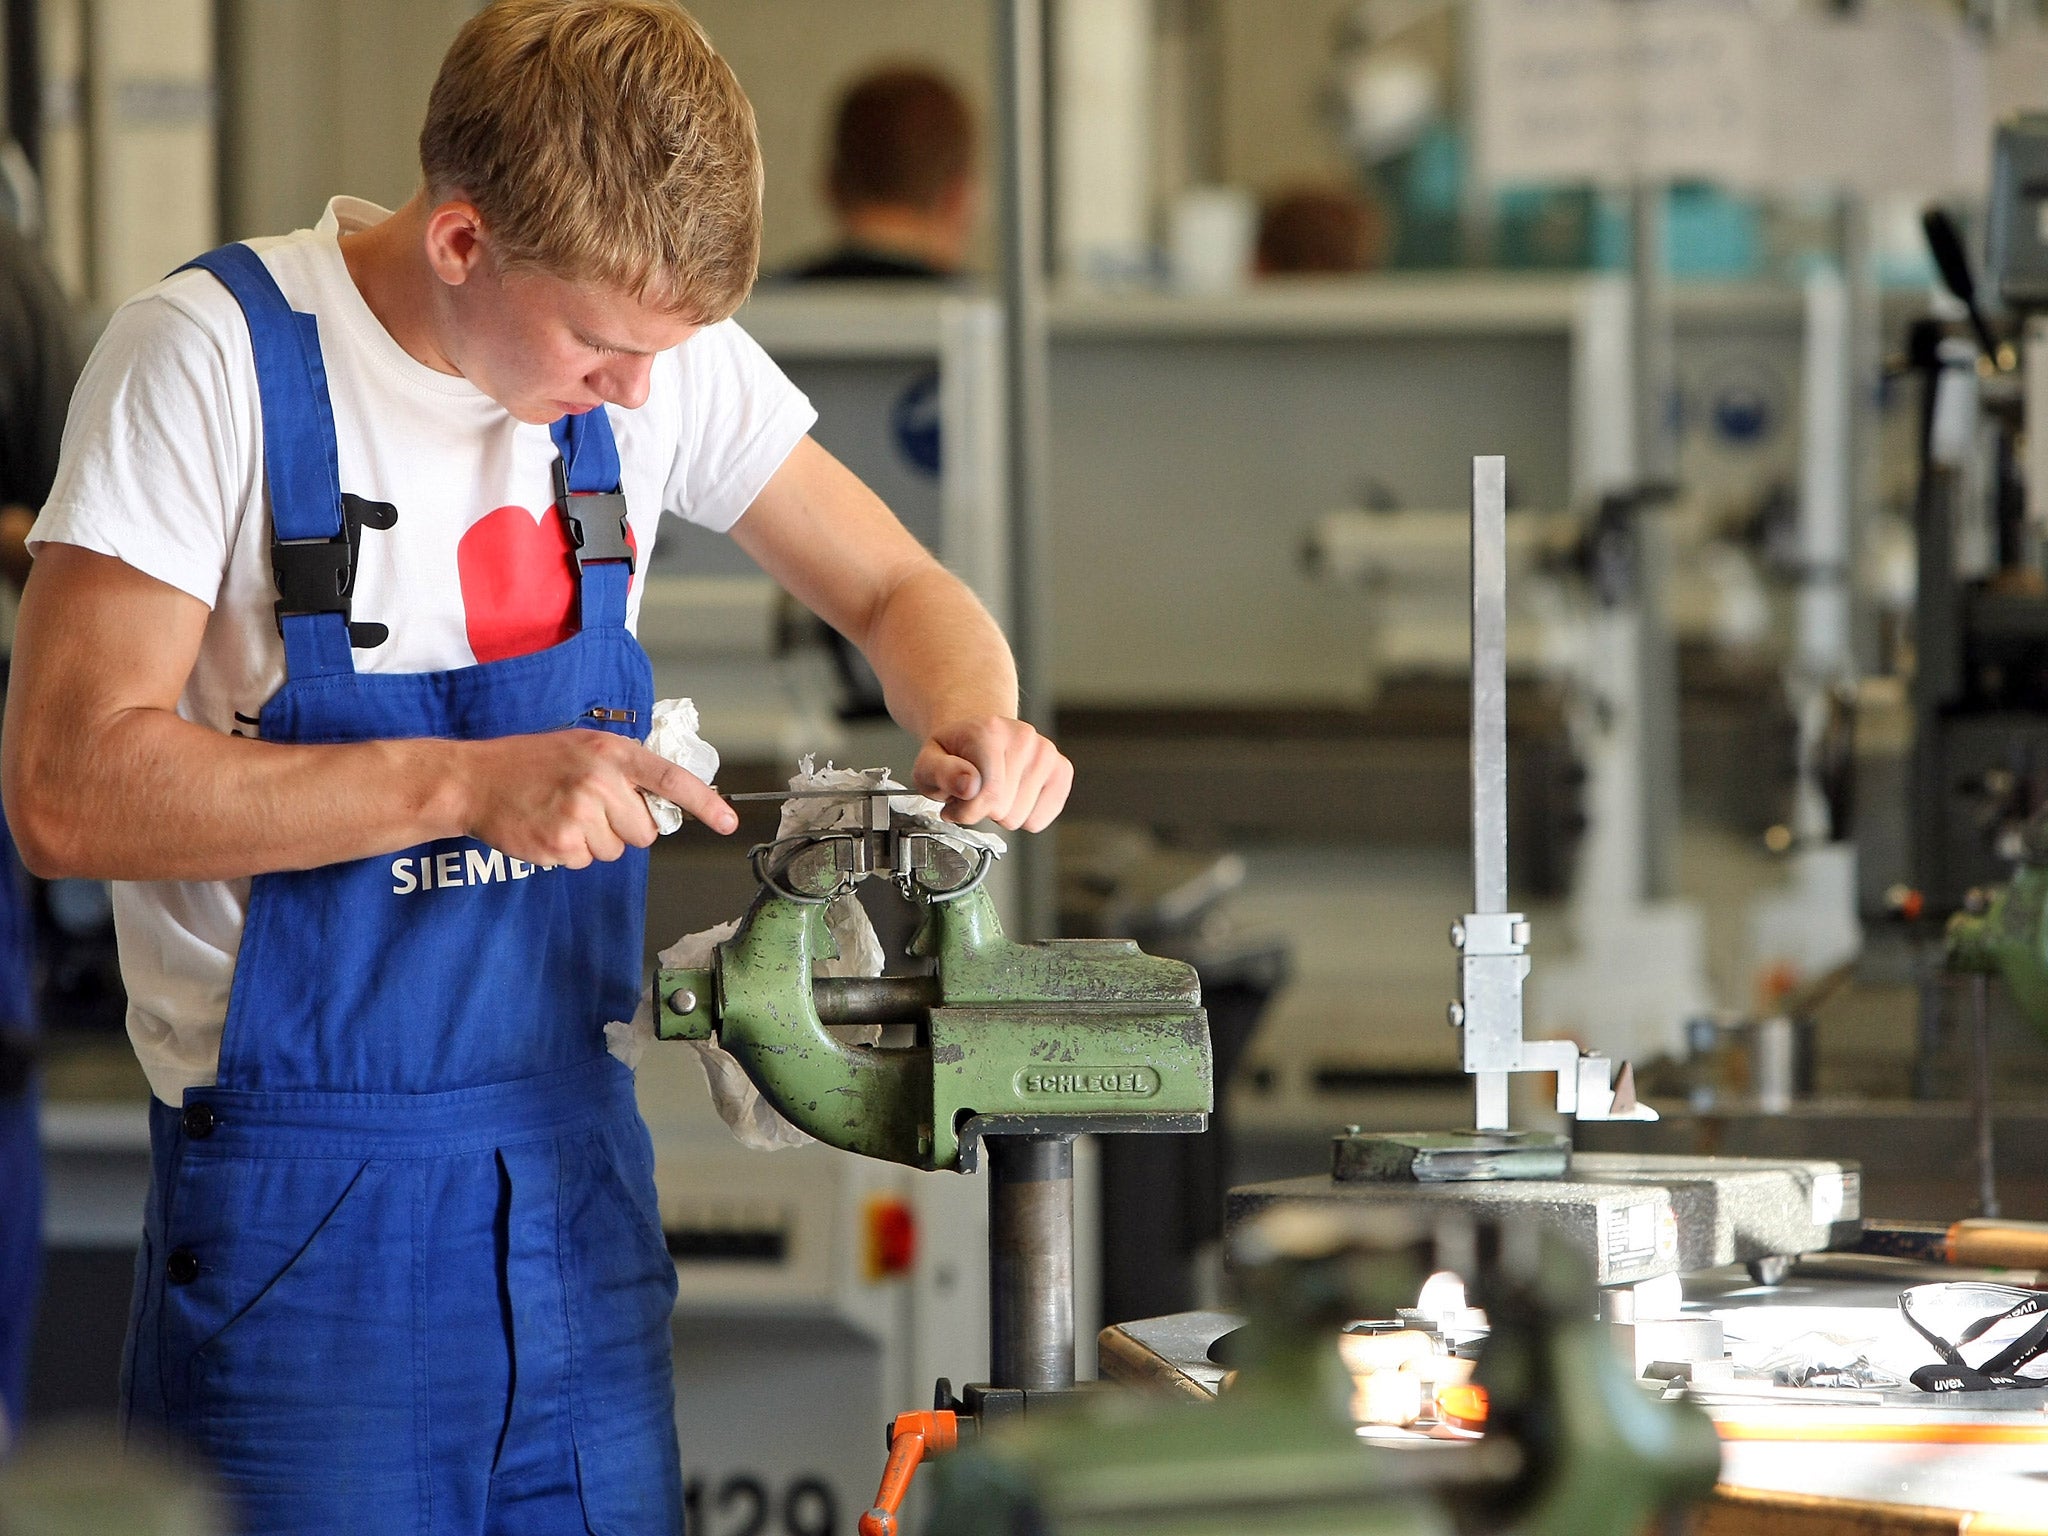 Hundreds of thousands of young people are being encouraged into low-skill, low-pay, on-the-job training schemes to meet ministers’ 'mad' target of creating three million apprenticeships by 2020